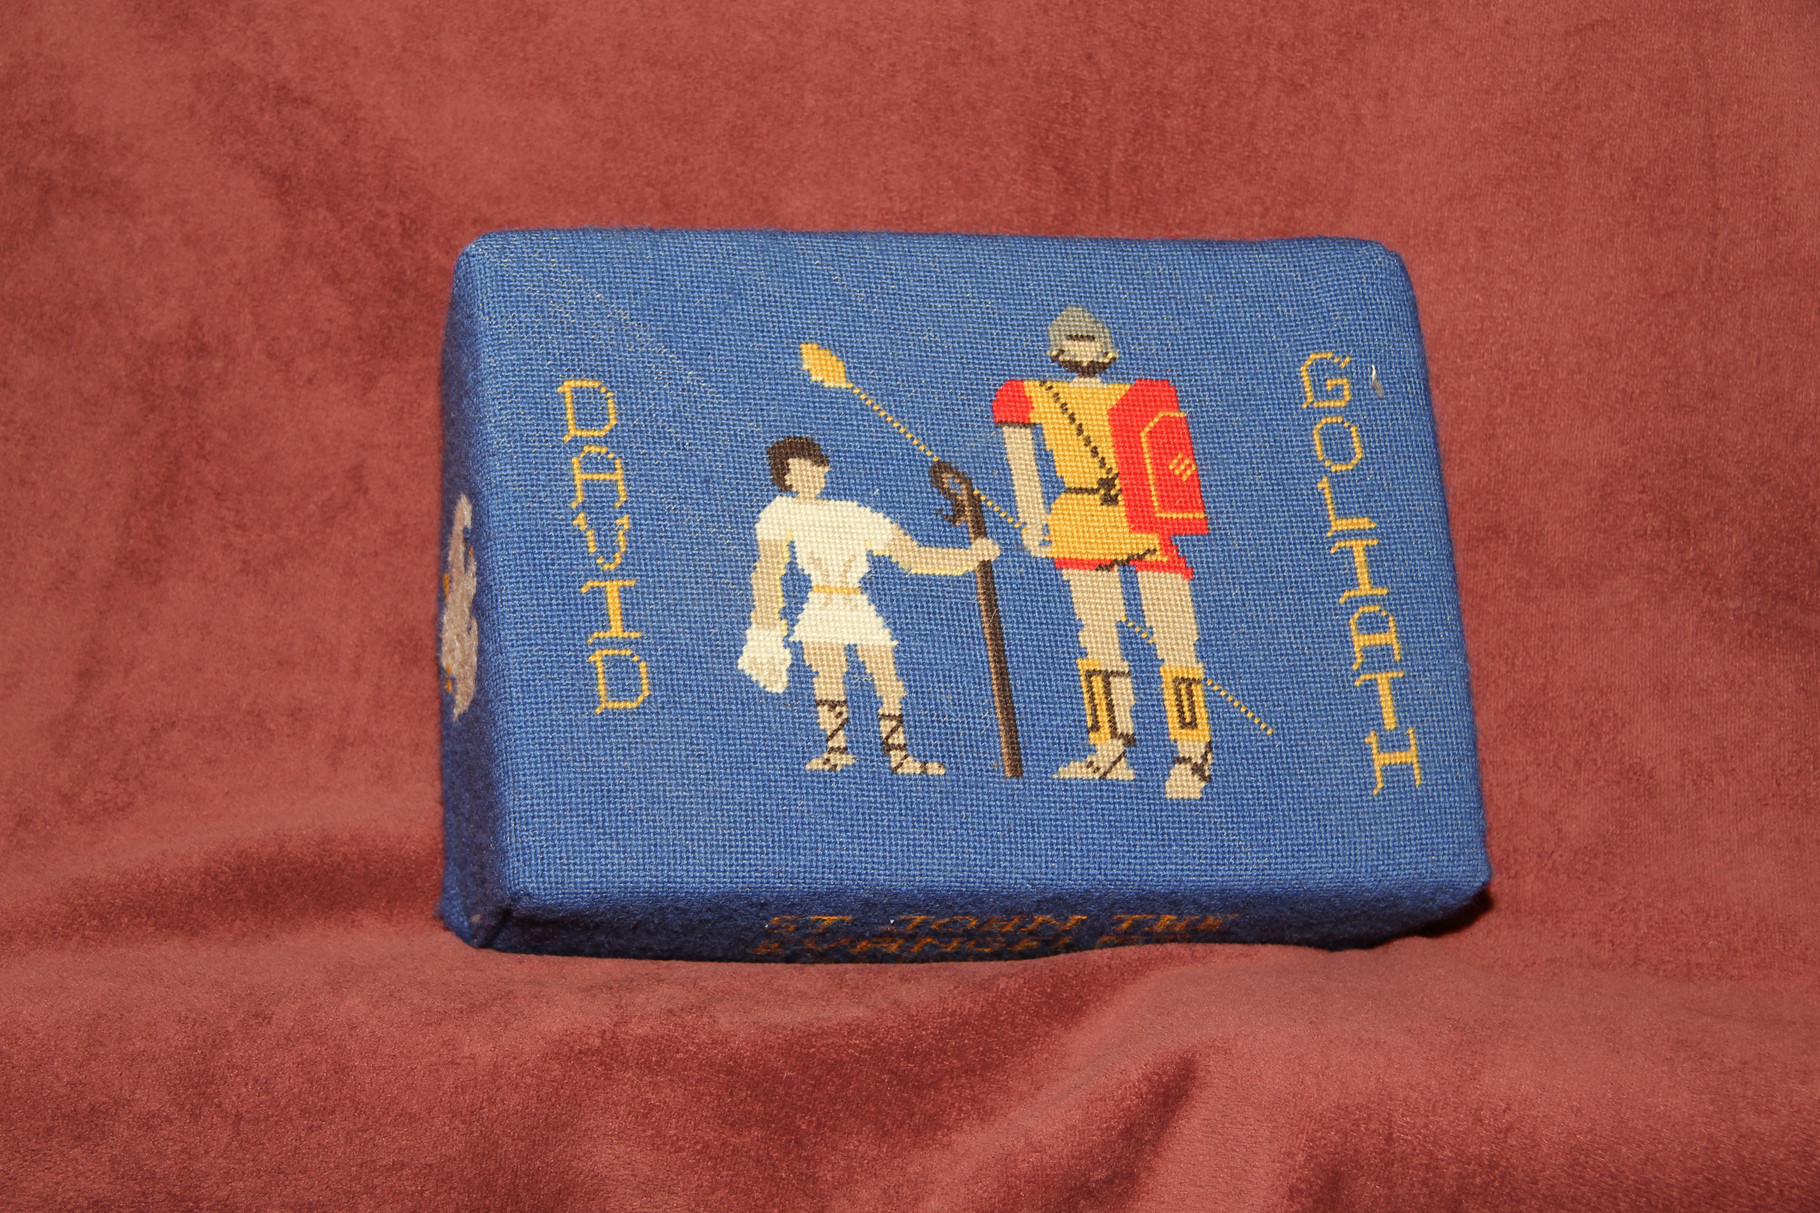 7. David and Goliath – donated by Joy Bowerman and worked by Brian Jones